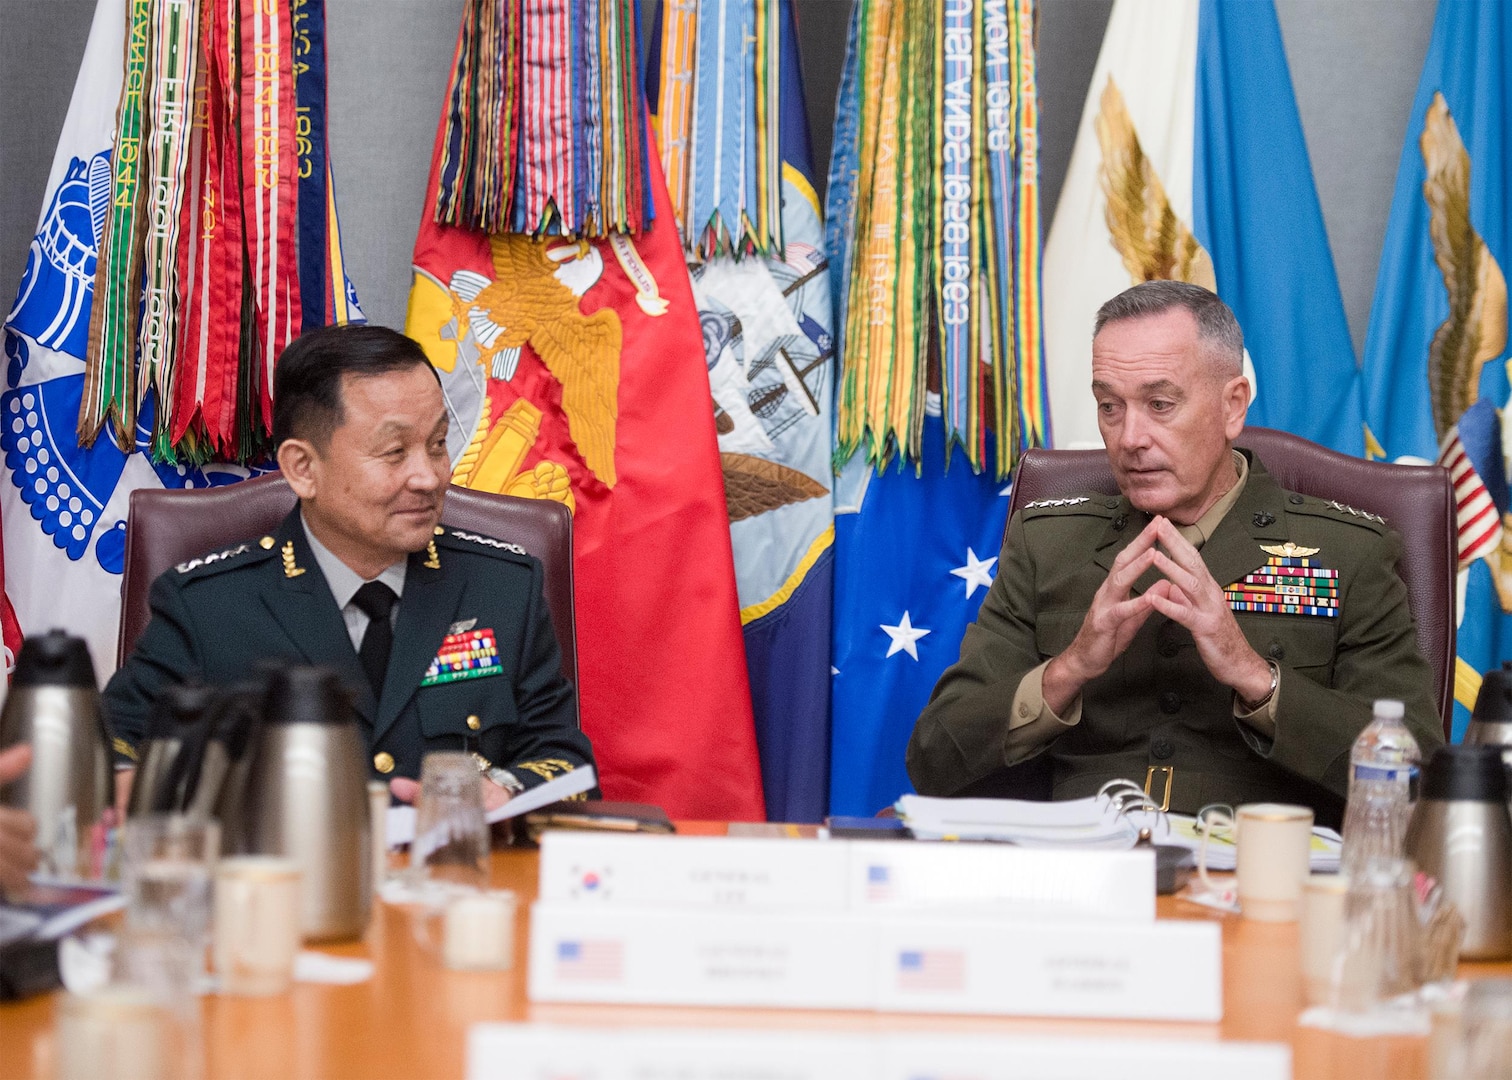 Chairman of the Joint Chiefs of Staff General Joseph F. Dunford hosted his Republic of Korea counterpart Gen. Lee Sun Jin for the 41st ROK-U.S. Military Committee Meeting at the Pentagon. Both senior military leaders strongly denounced North Korea's nuclear and missile provocations, stating they pose a serious threat to the Korean Peninsula, to the region, and to global peace and stability.